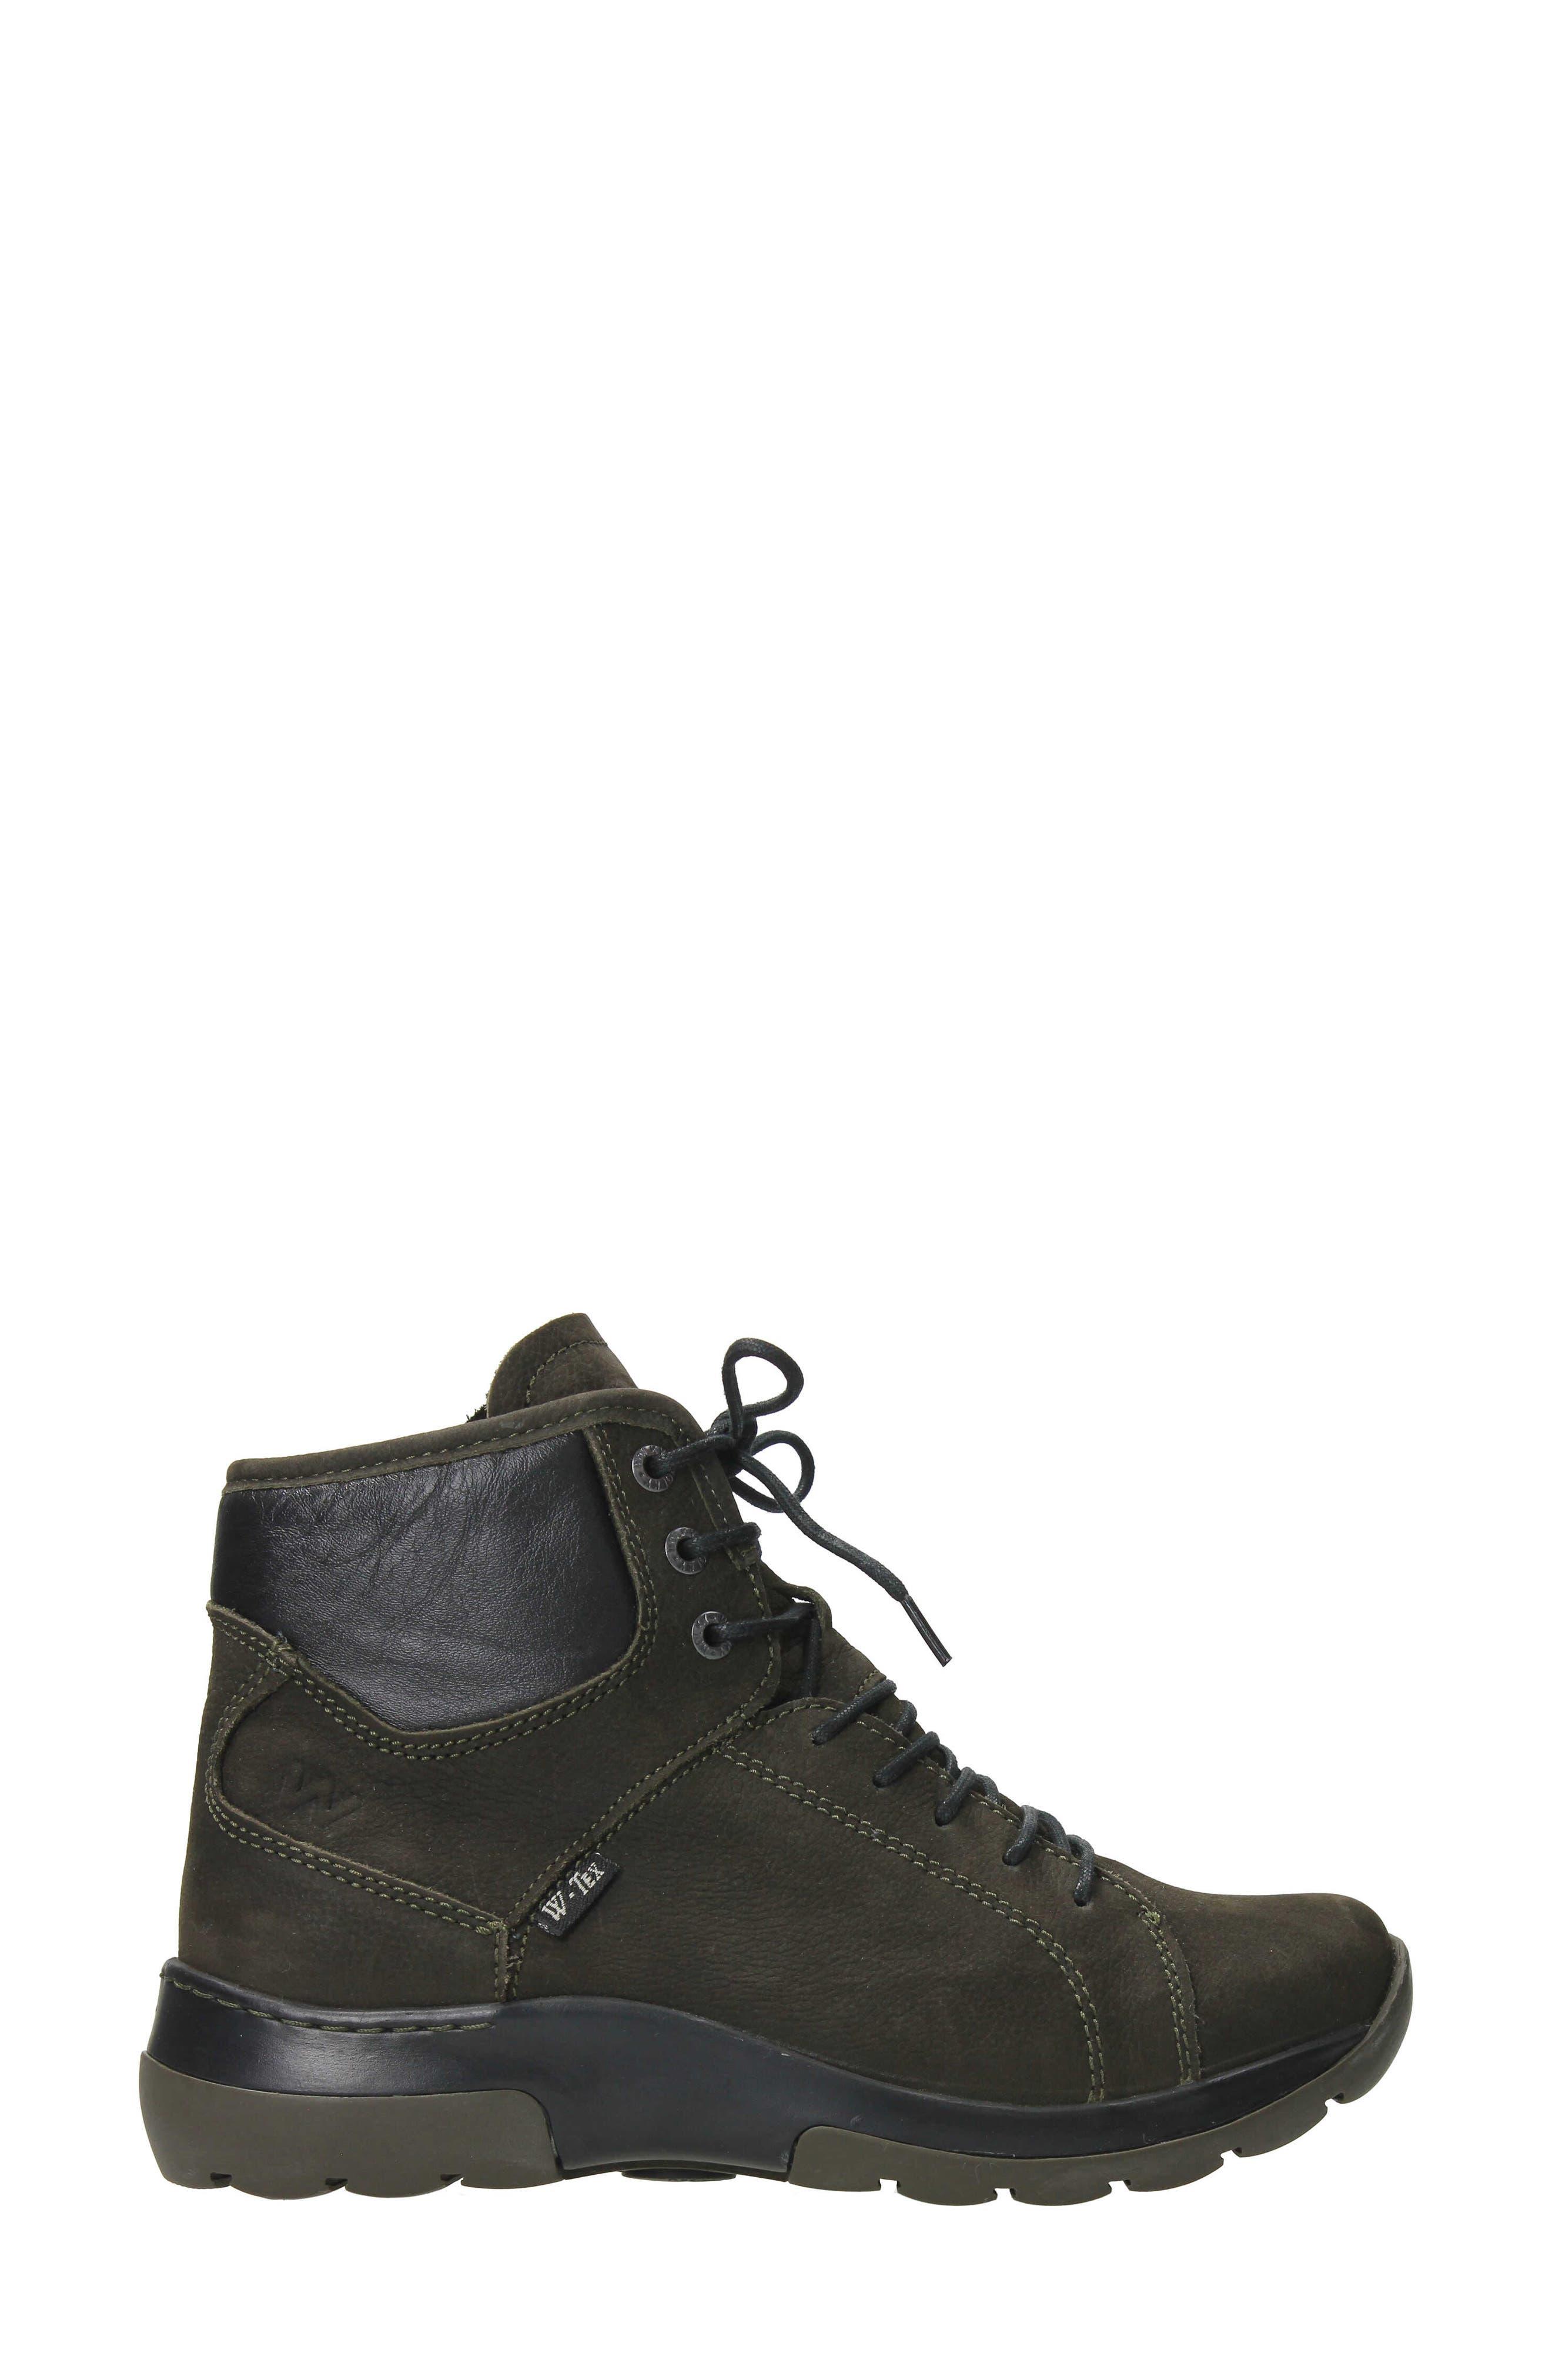 Wolky Ambient Lace-up Boot in Black | Lyst